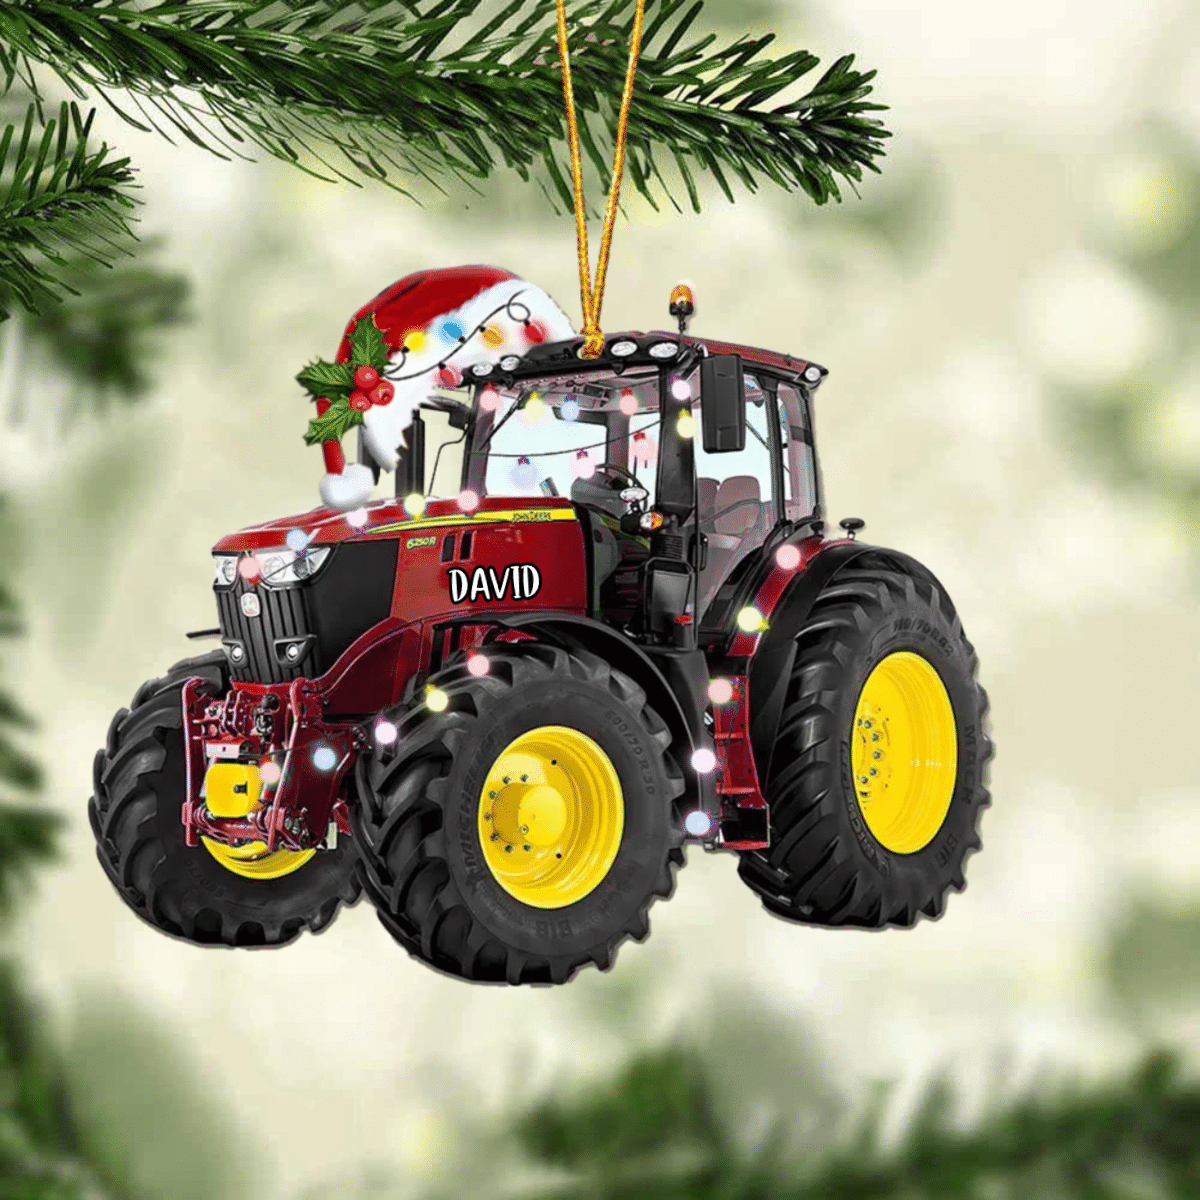 Personalized Tractor Christmas Ornament for Farmer/ Gift for Farmhouse Decor/ Tractor Driver Ornament for Dad